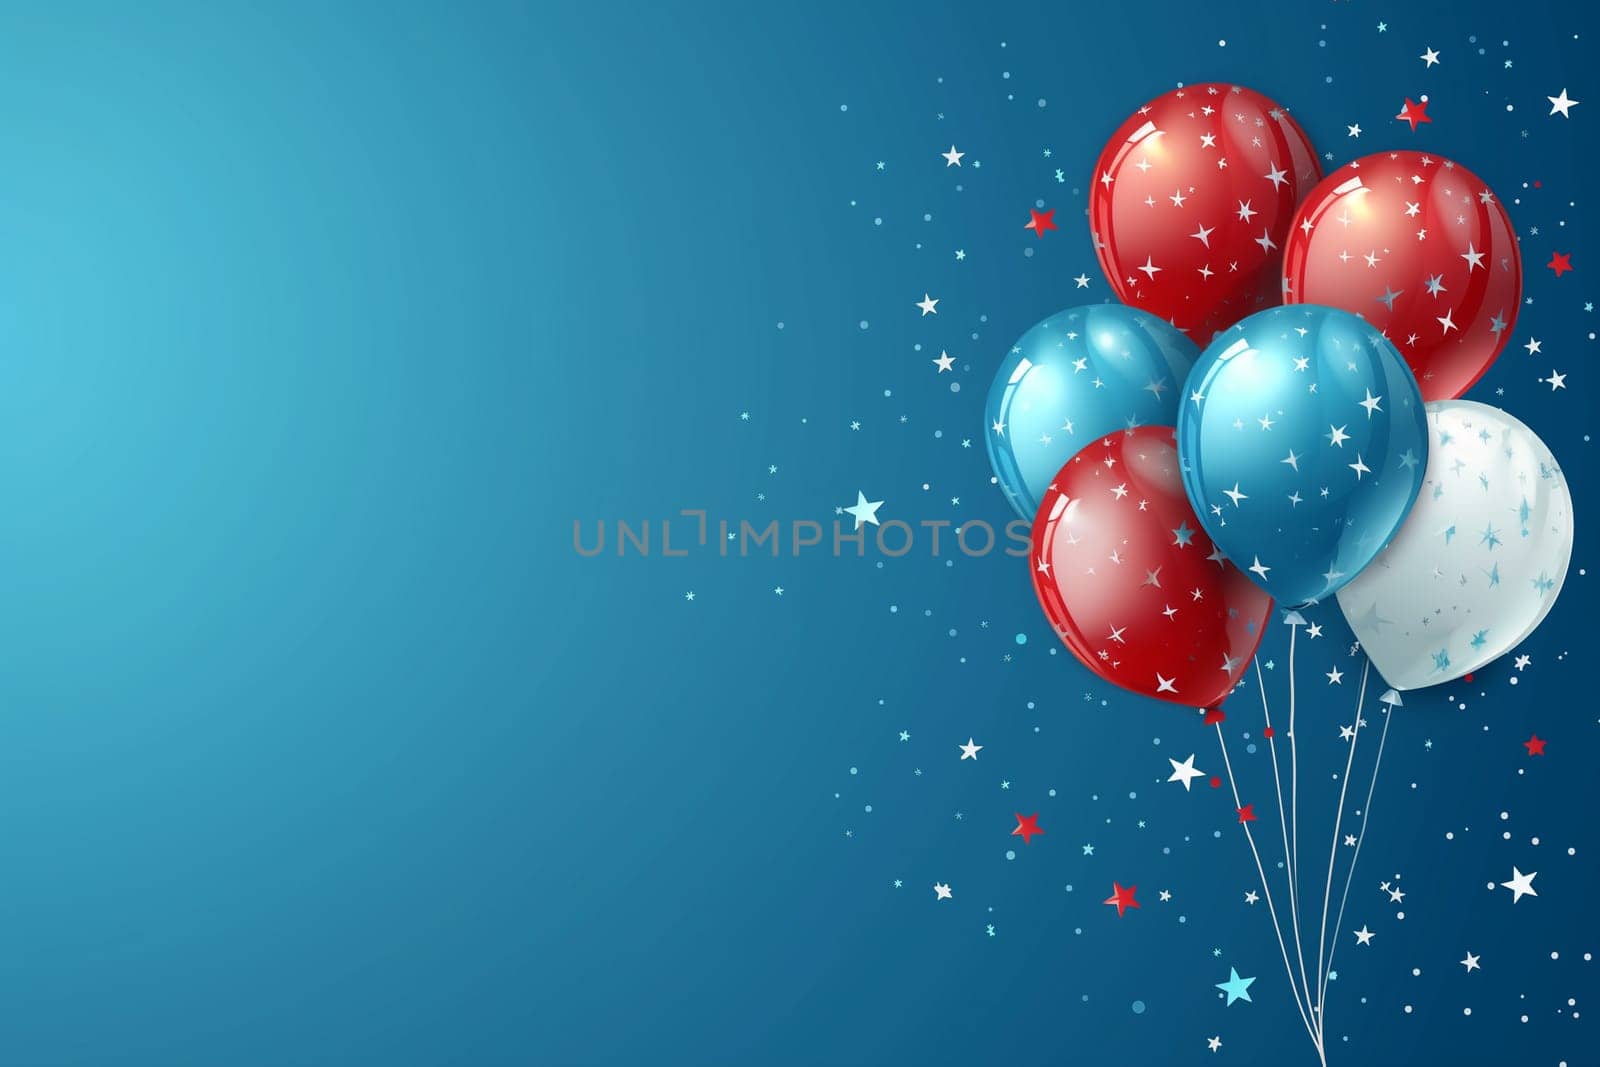 Patriotic Red, White, and Blue Balloons Floating in the Air by Sd28DimoN_1976